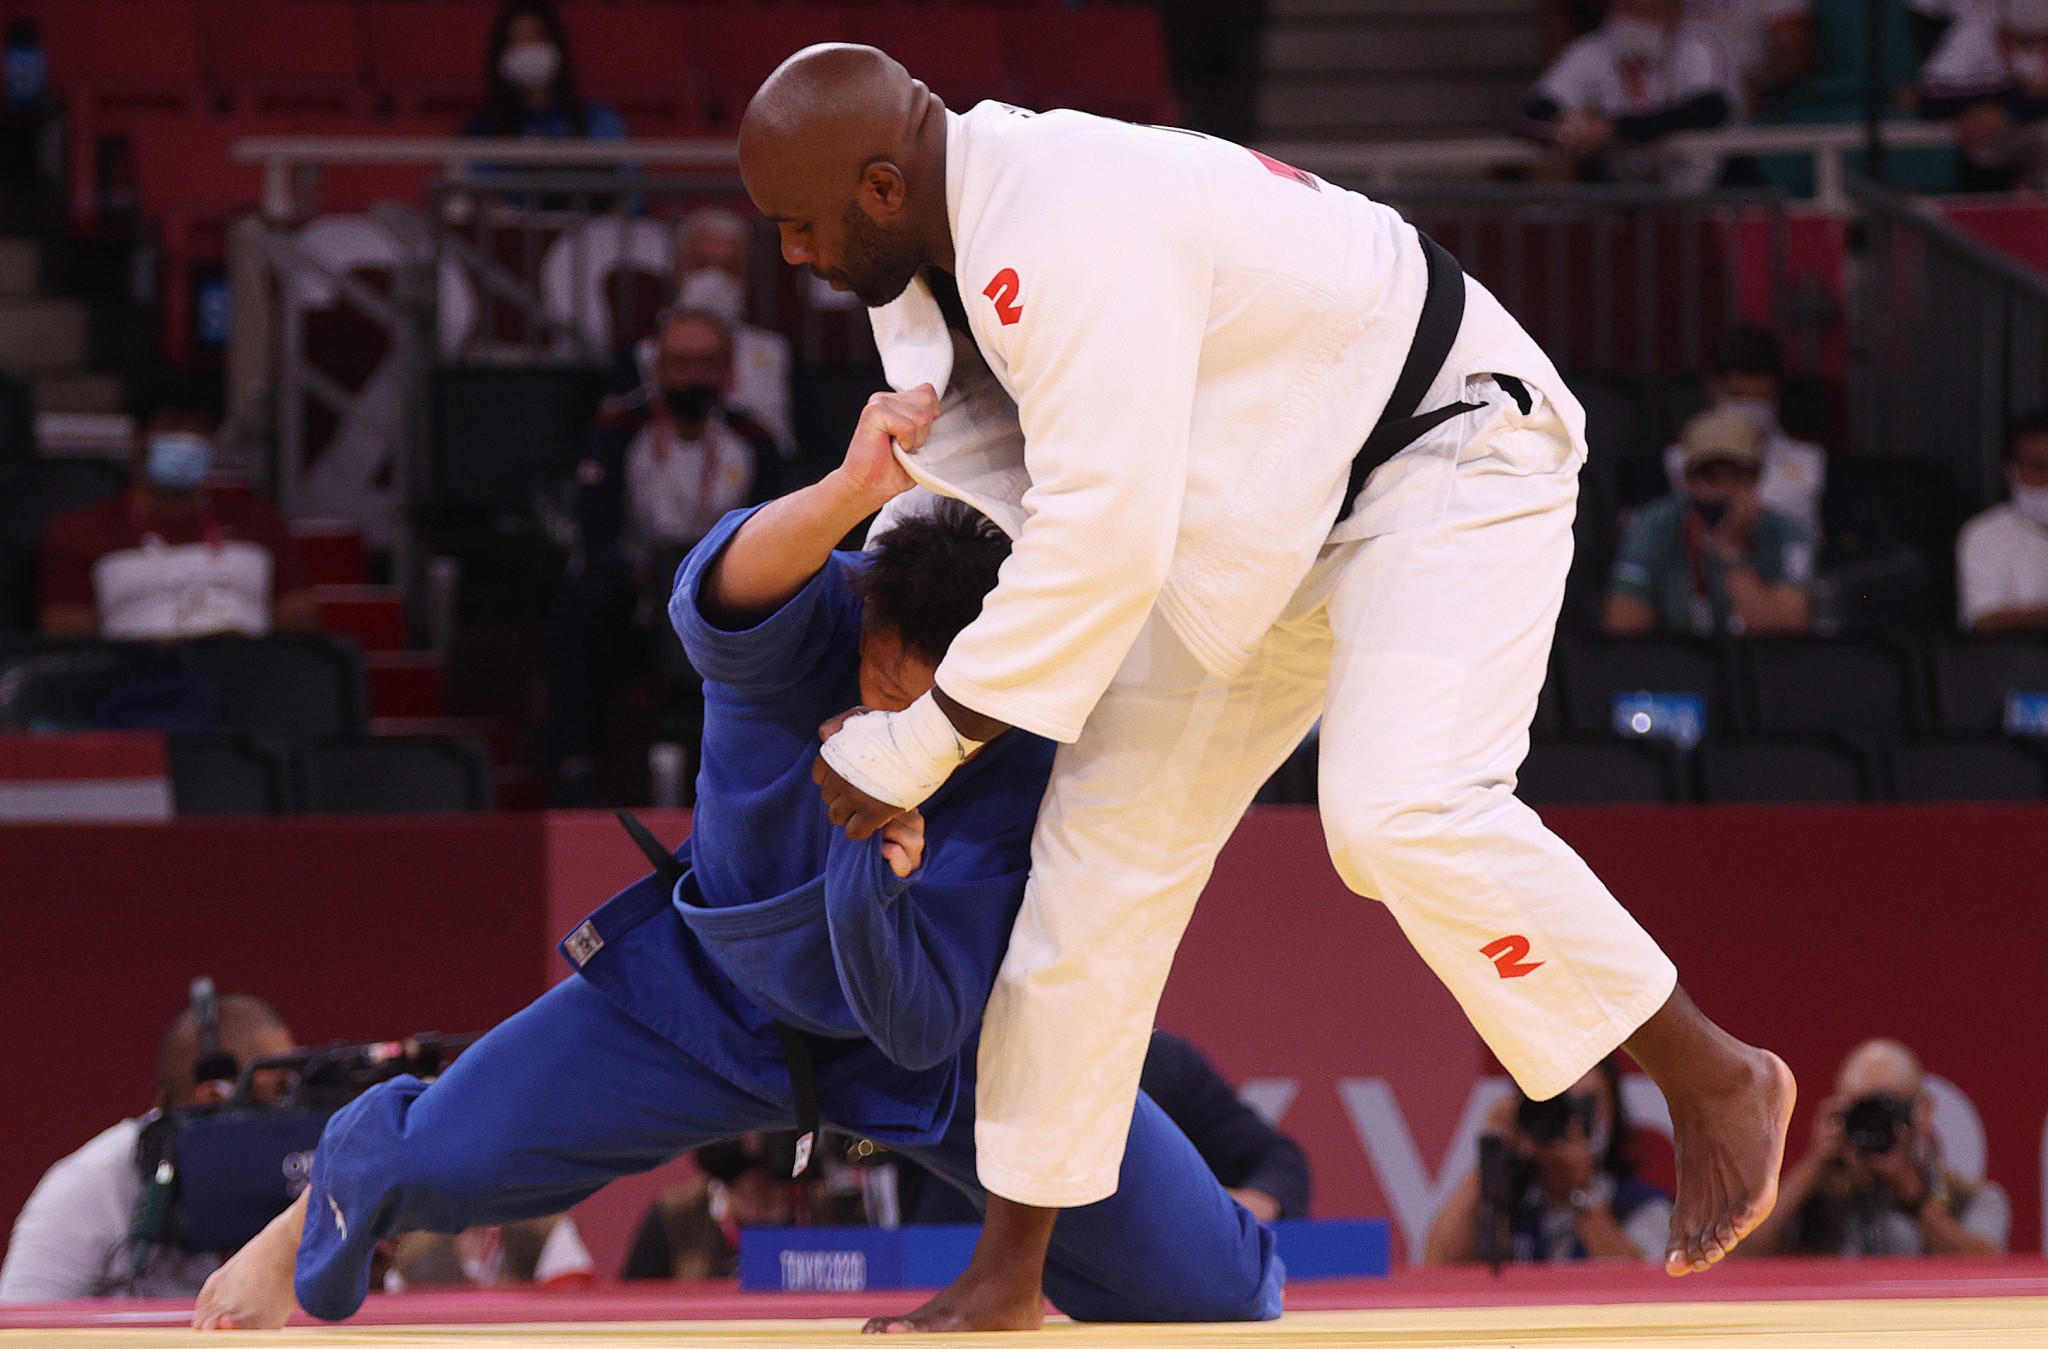 Teddy Riner of France has launched a new textile brand named Fightart ©Getty Images